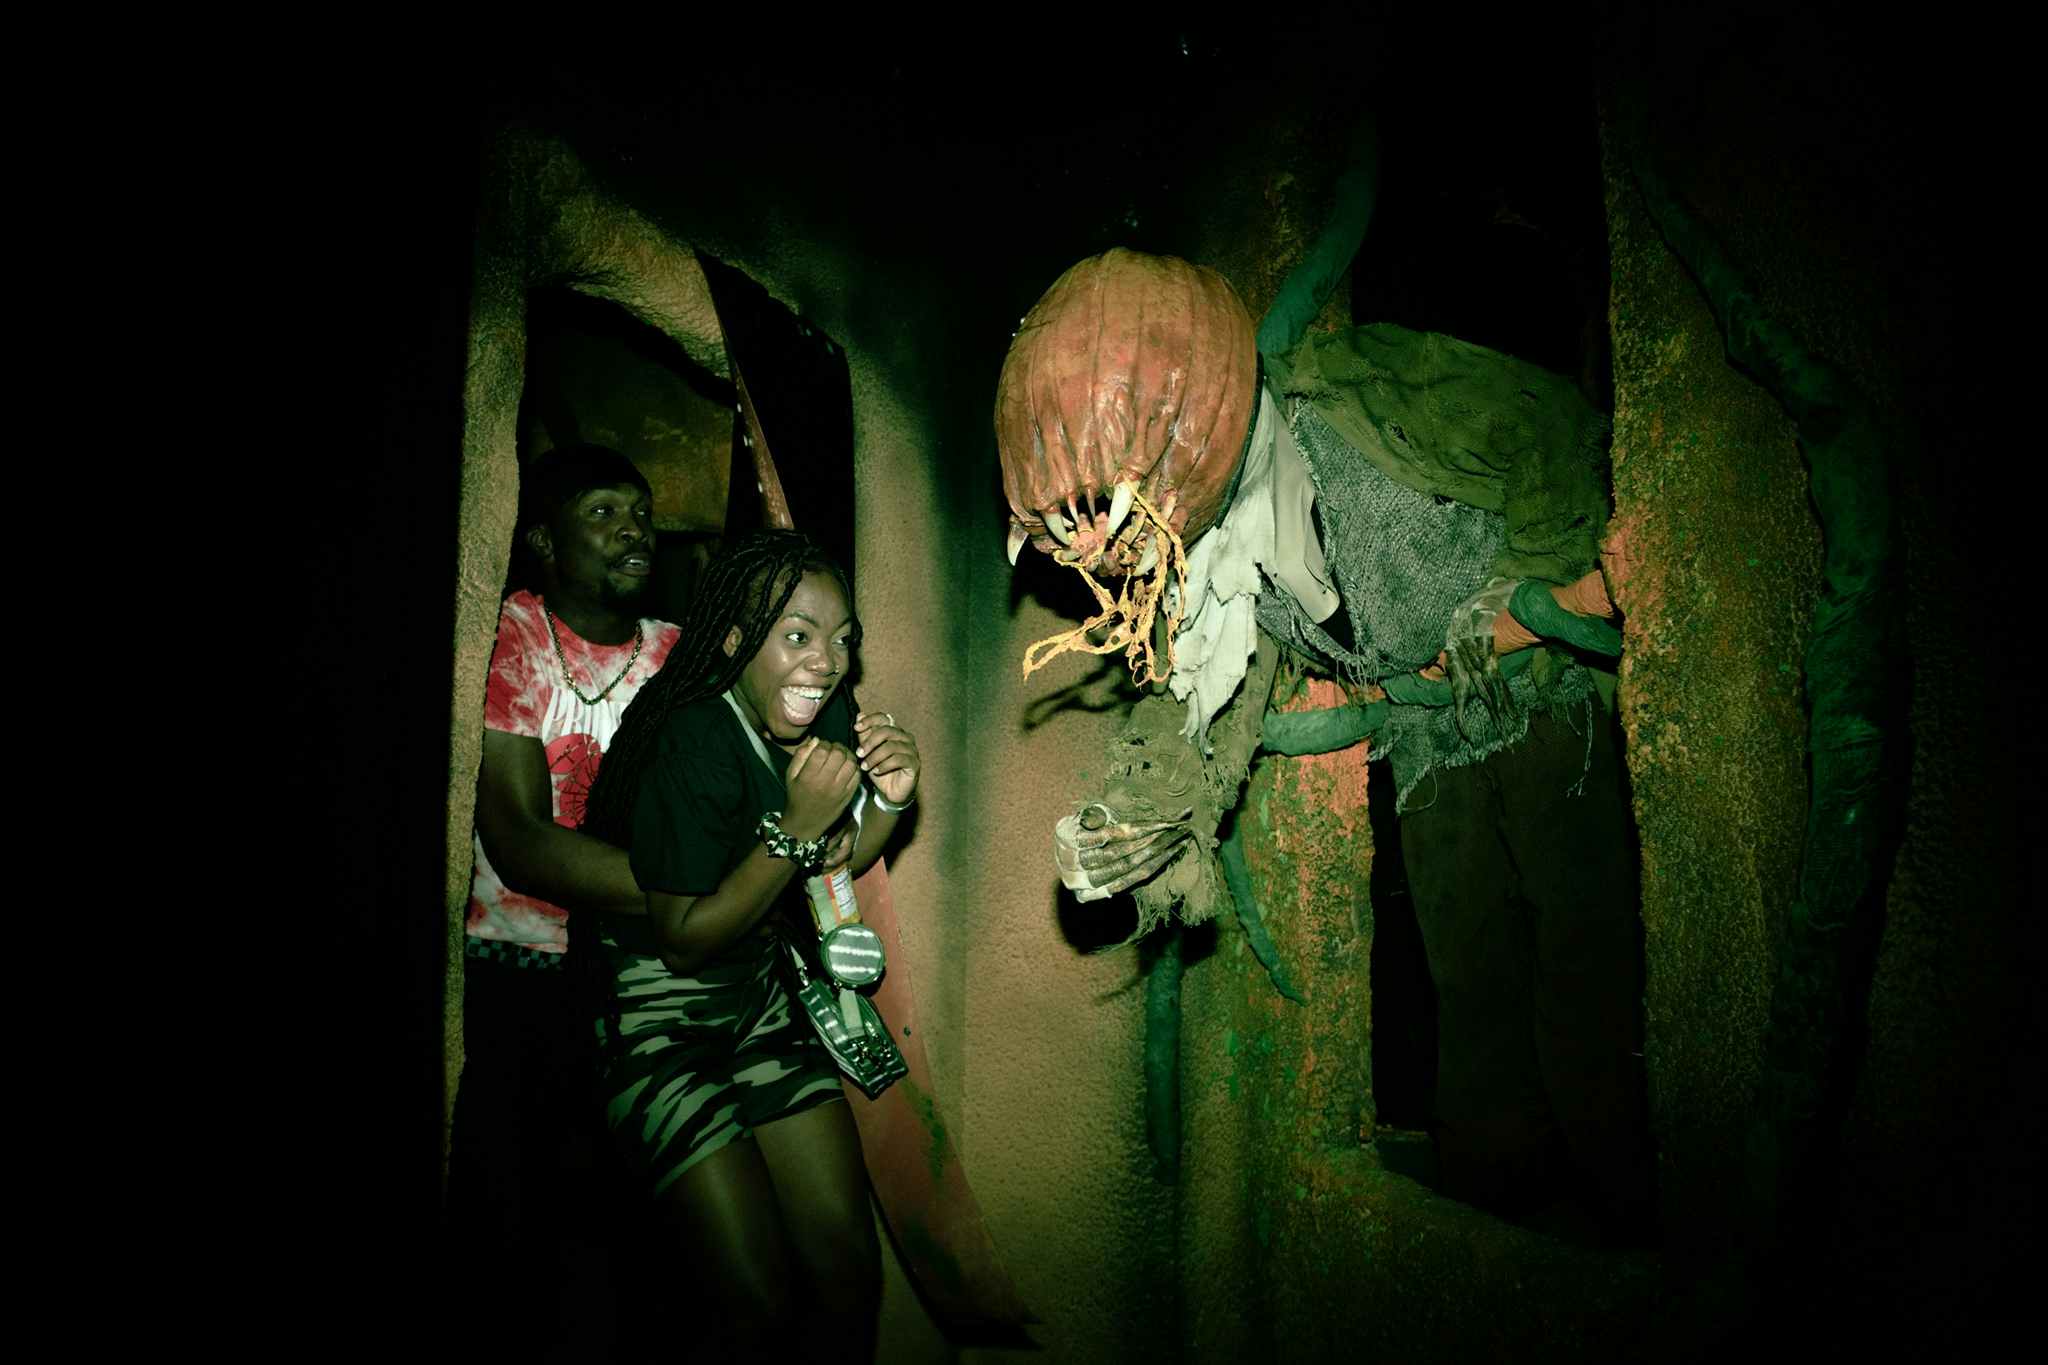 A couple walking through a haunted house getting scared by a figure with a pumpik head and sharp teeth